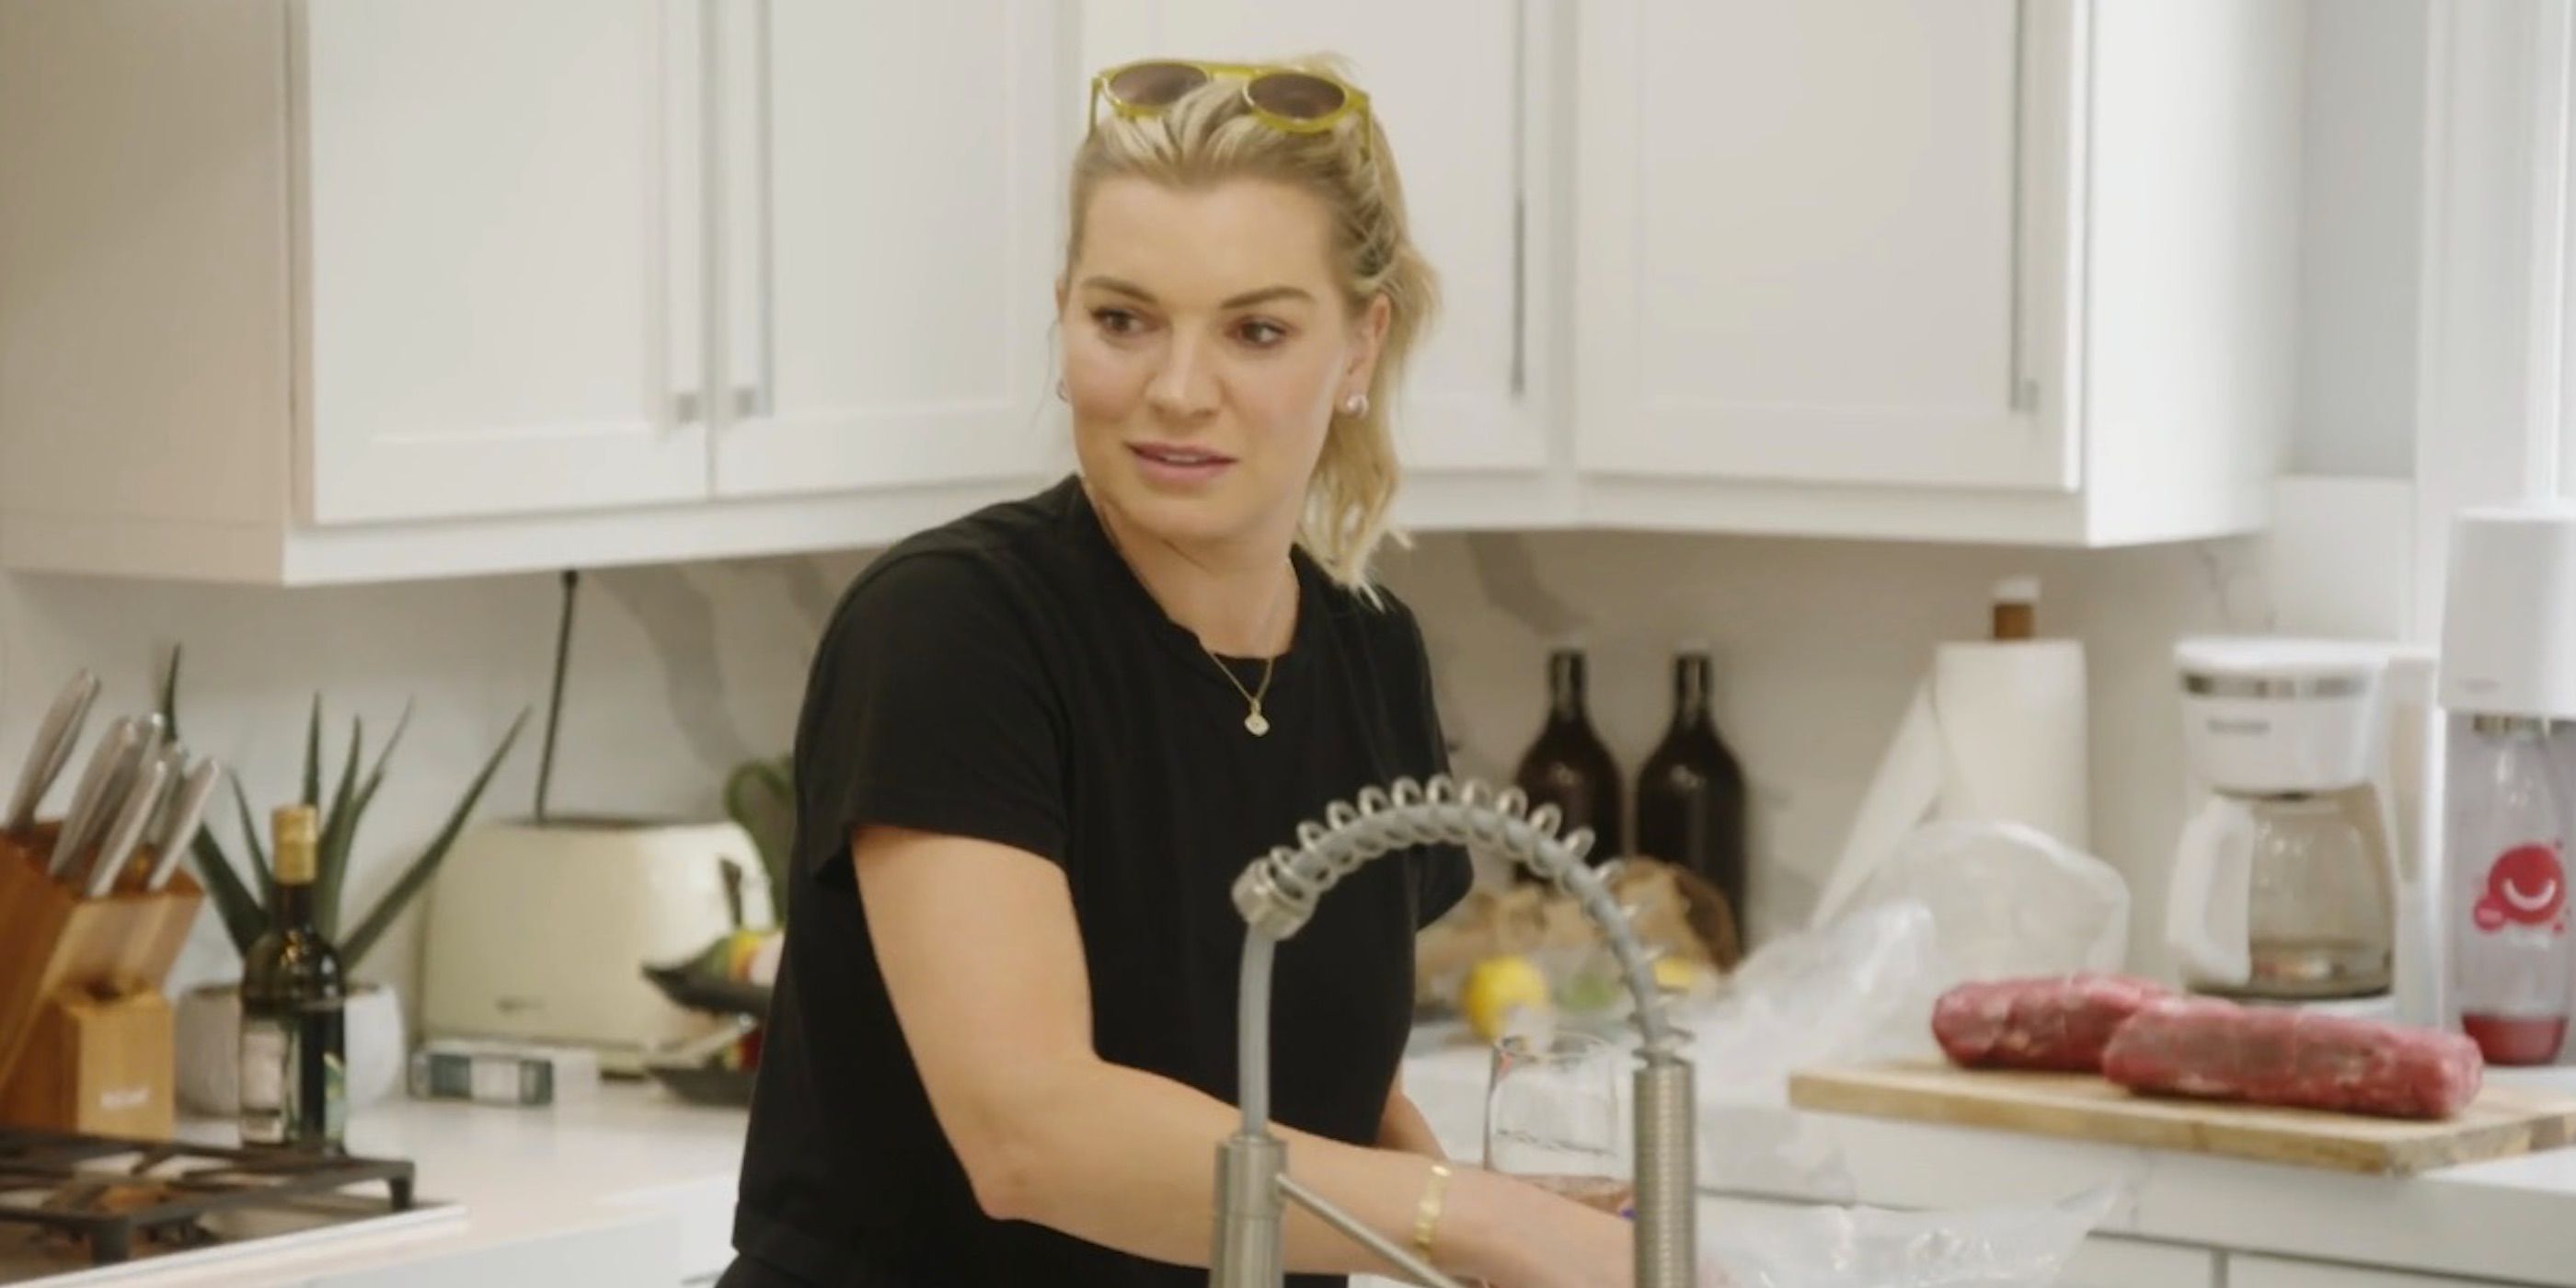 Lindsay Hubbard looks out of place in the kitchen of 'Summer House'